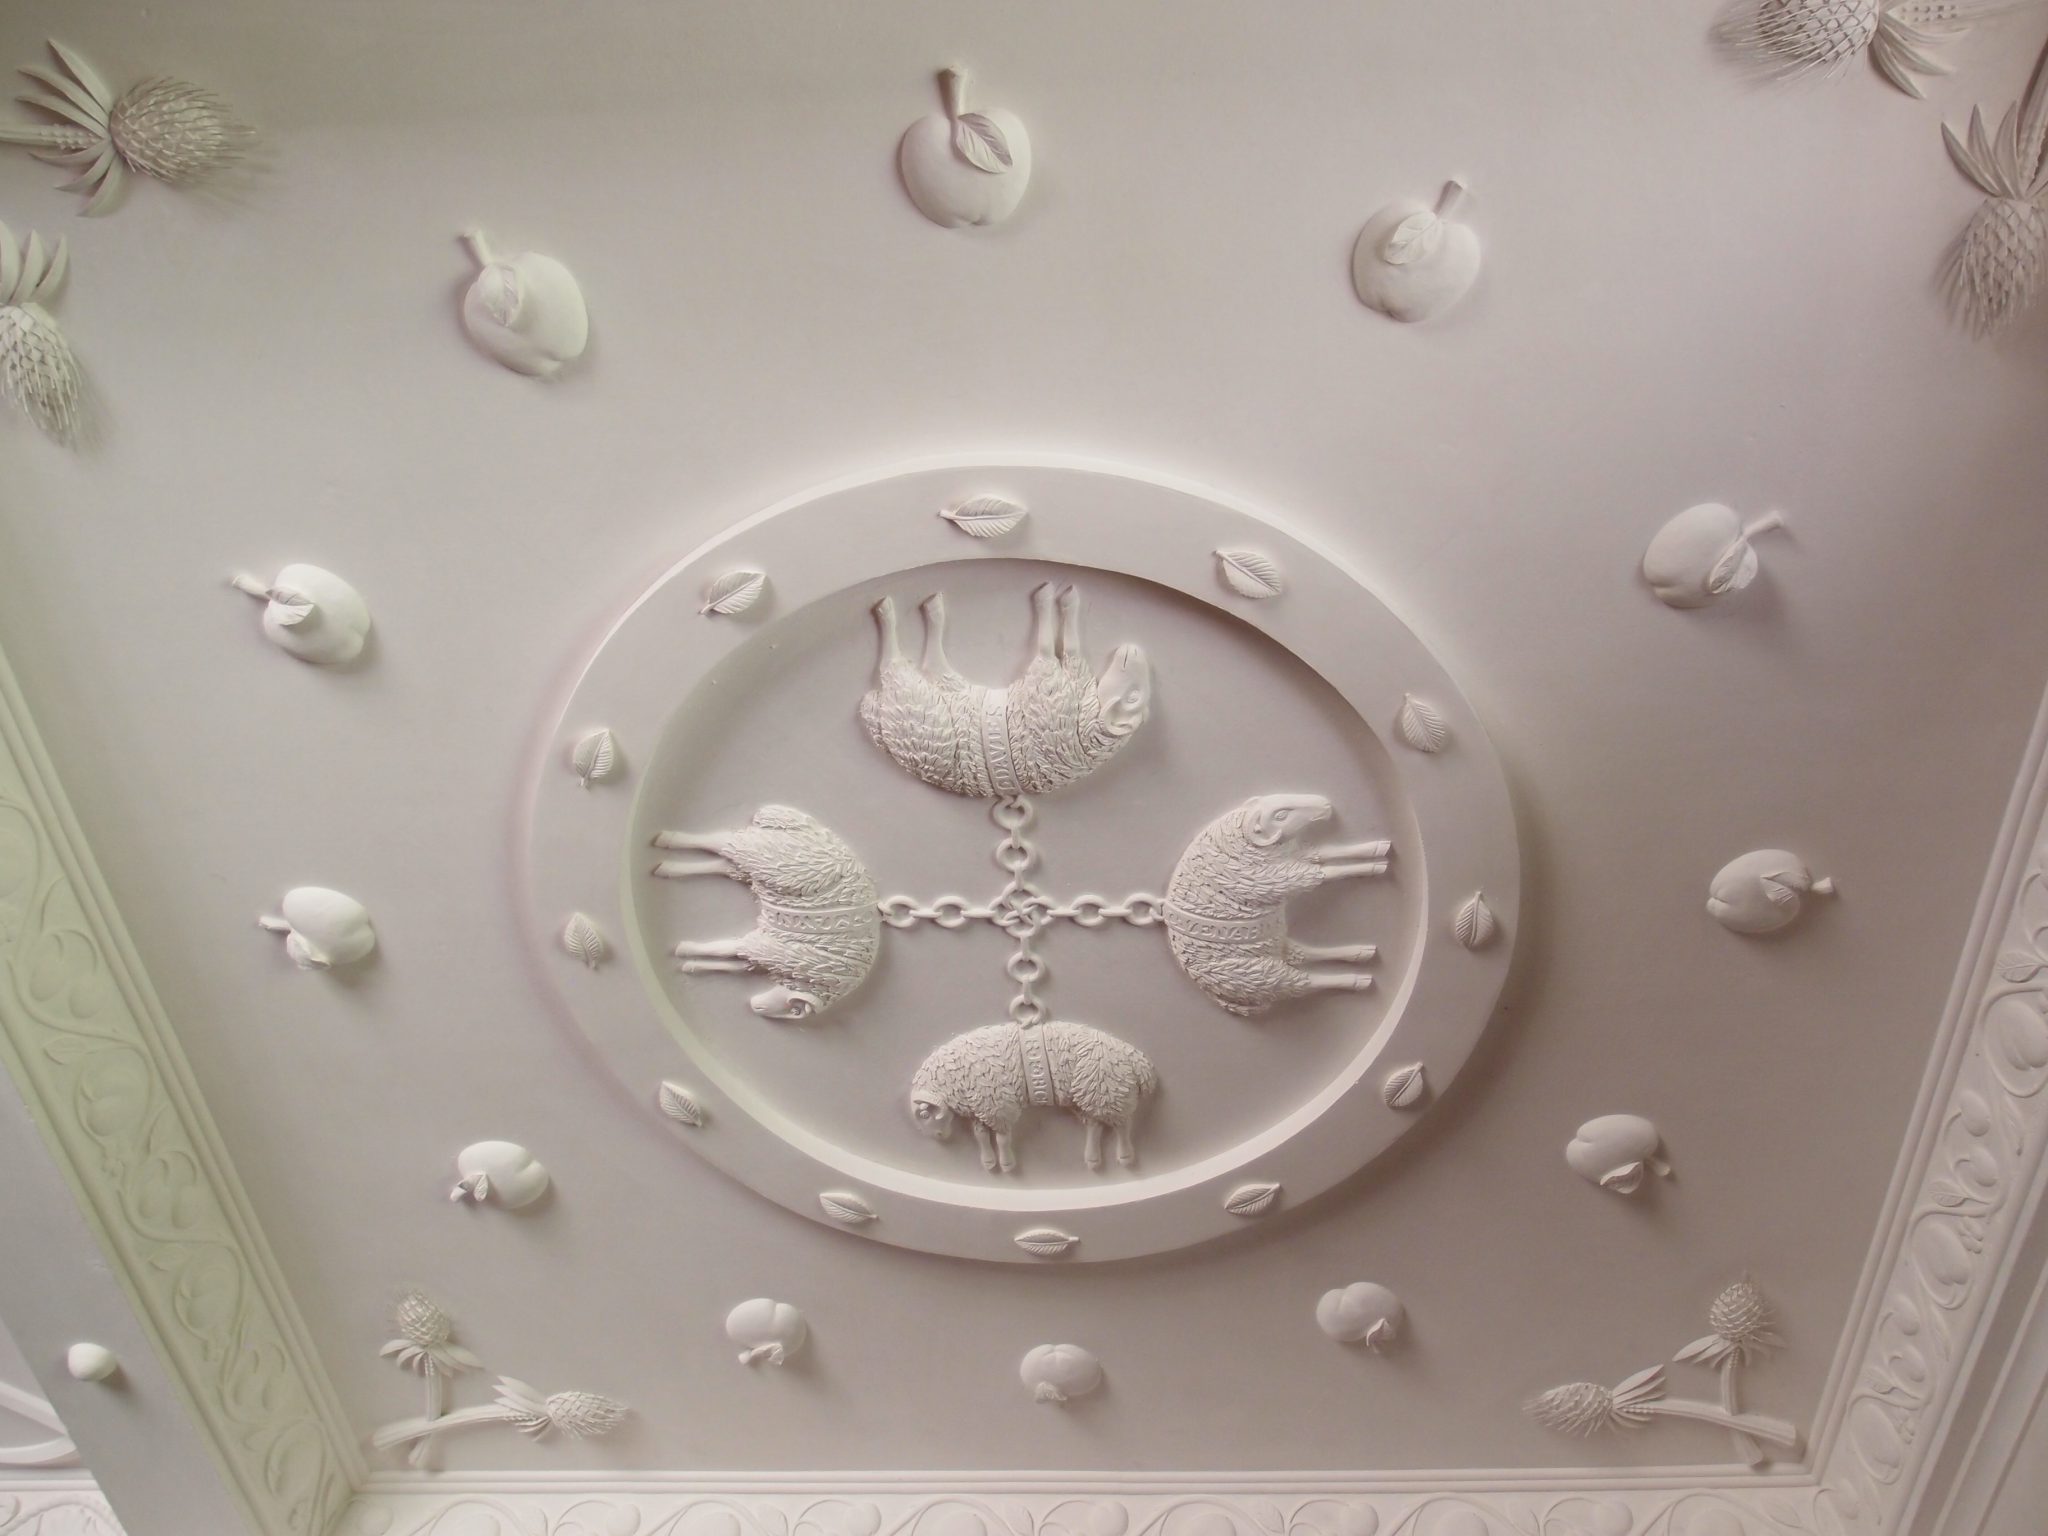 The beautiful ceiling in the Drake Chamber was installed in 1988. The hand-modeled frieze is done in a traditional, Devon style.